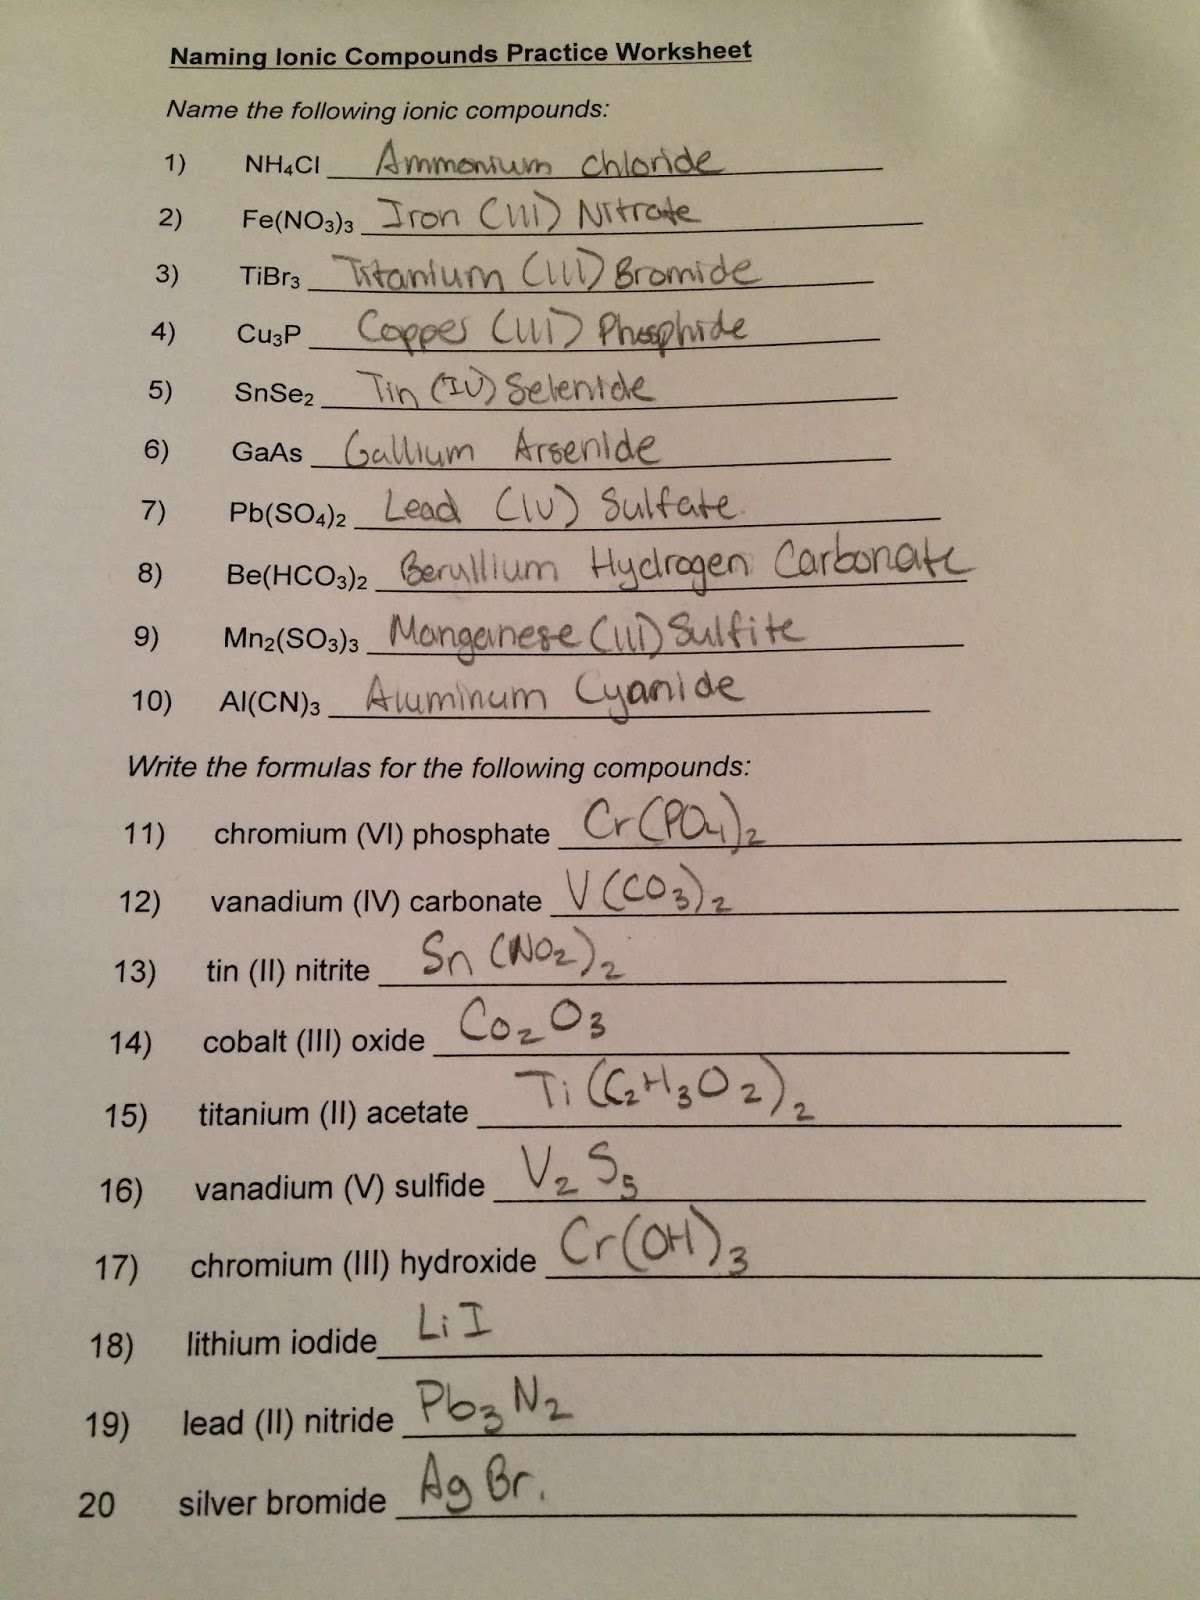 ionic-compounds-practice-worksheet-lotinspire